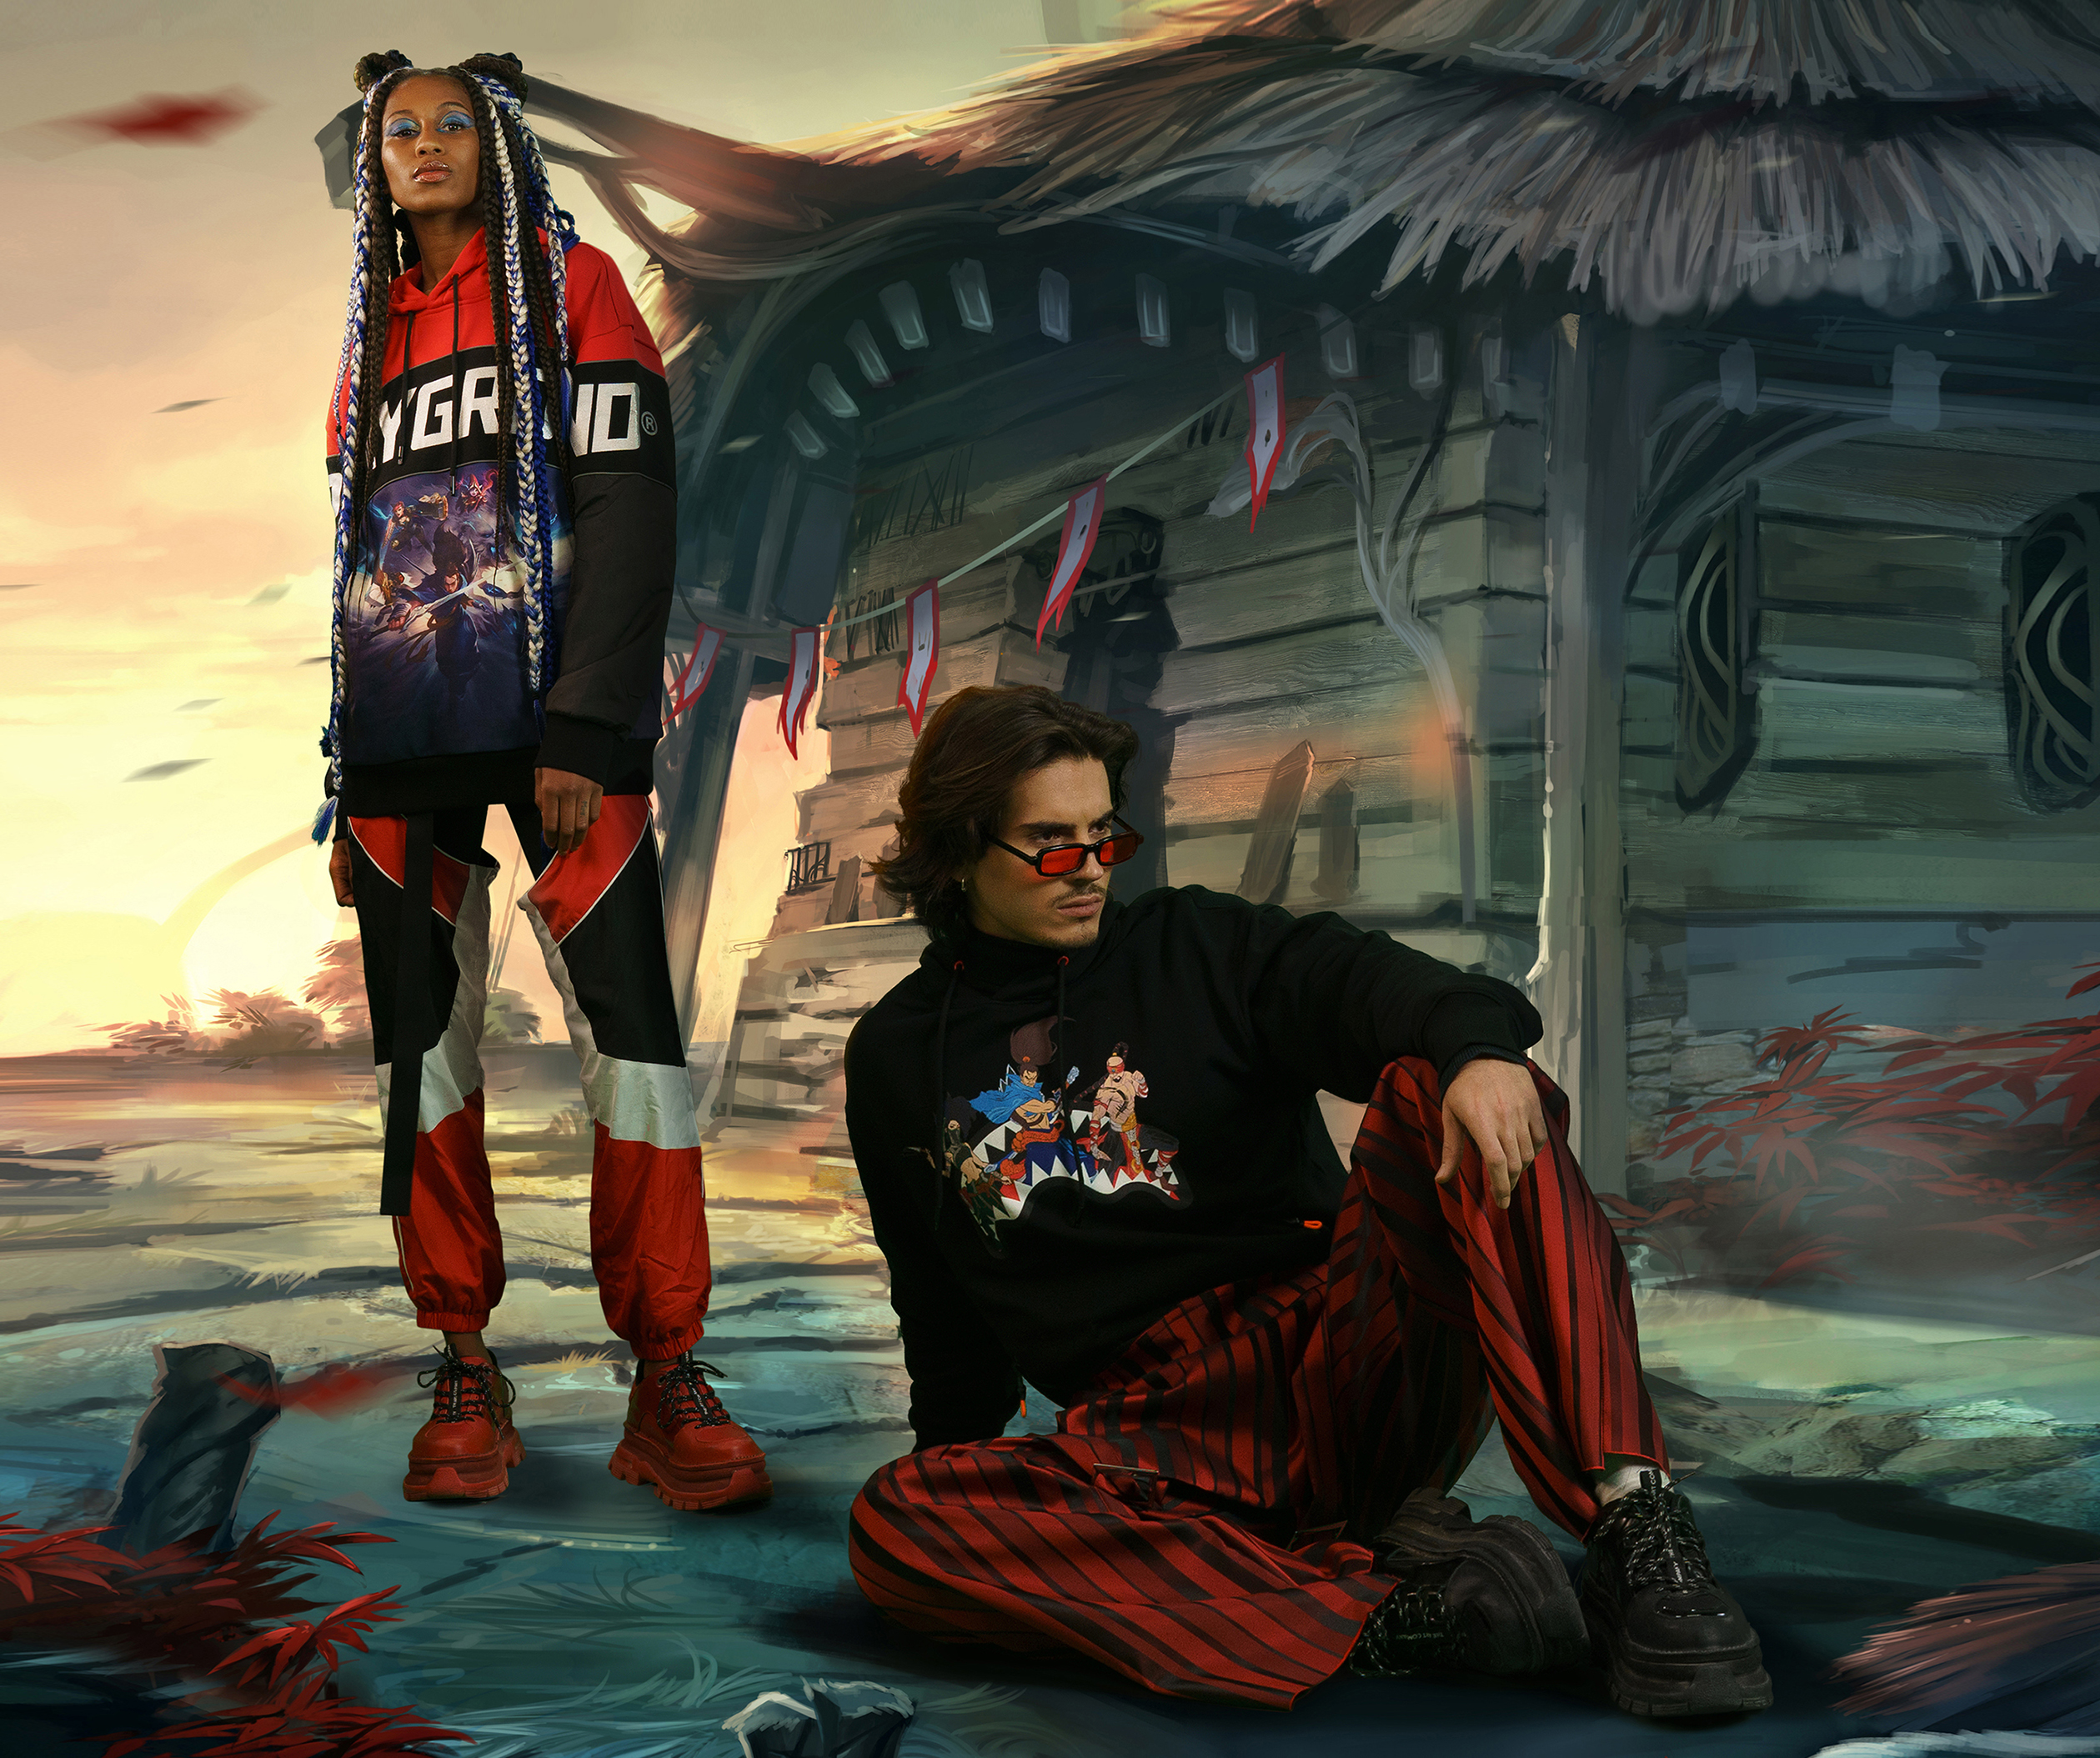 Sprayground x League of Legends Limited-Edition Collection Is Here